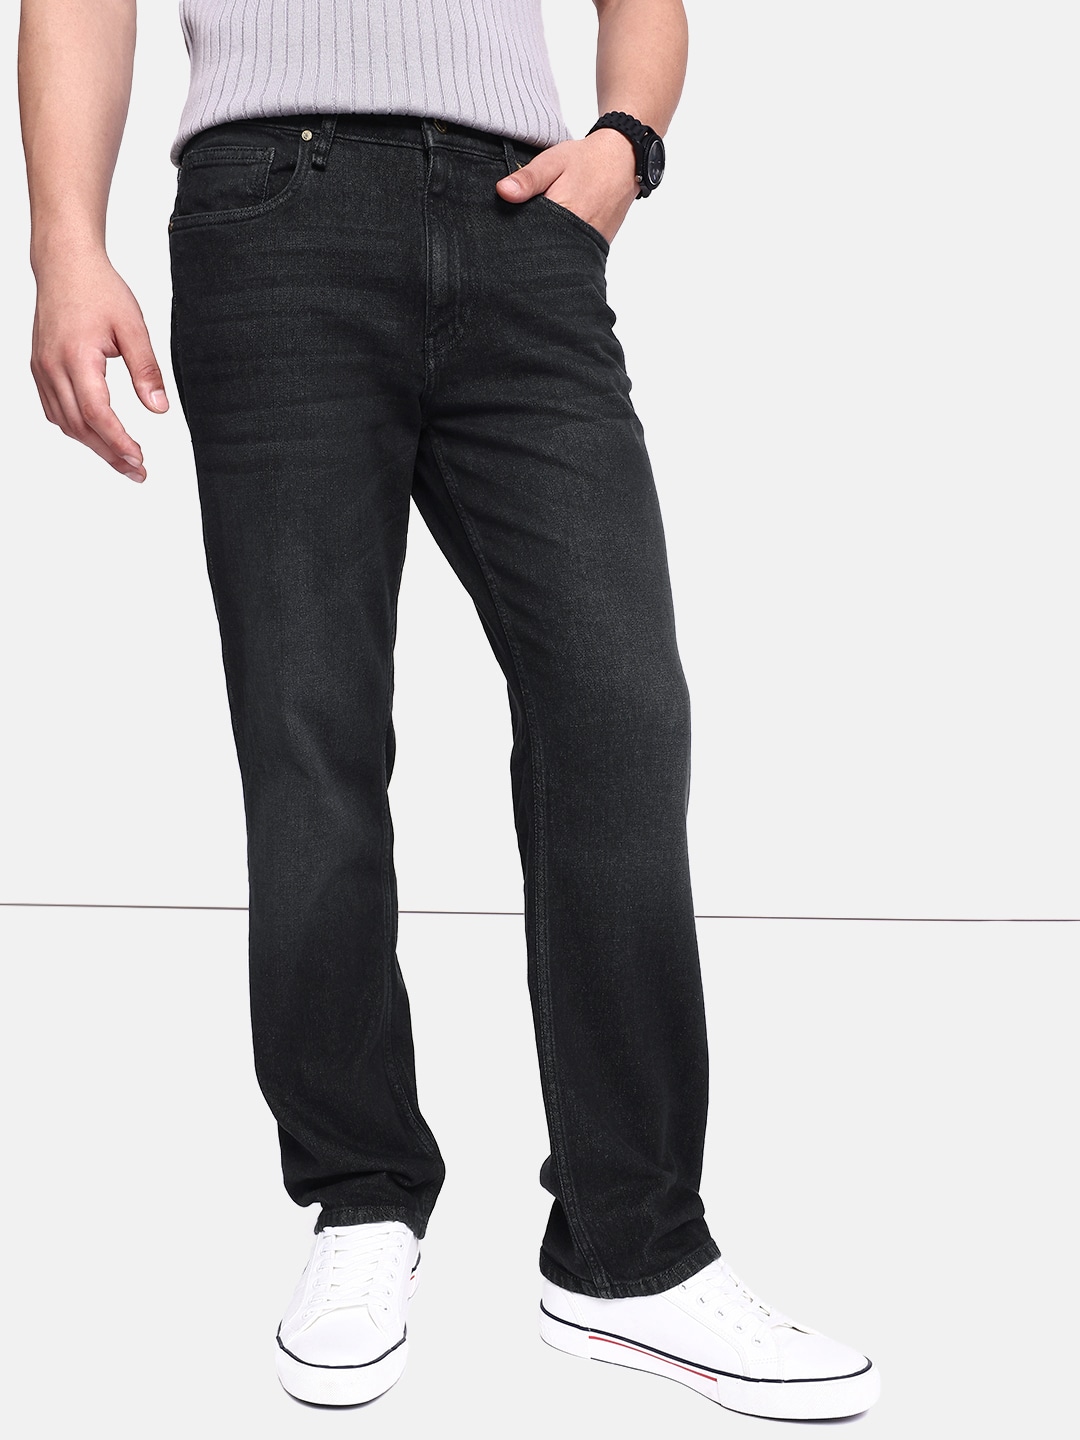 The Roadster Life Co. Men Light Fade Stretchable Jeans